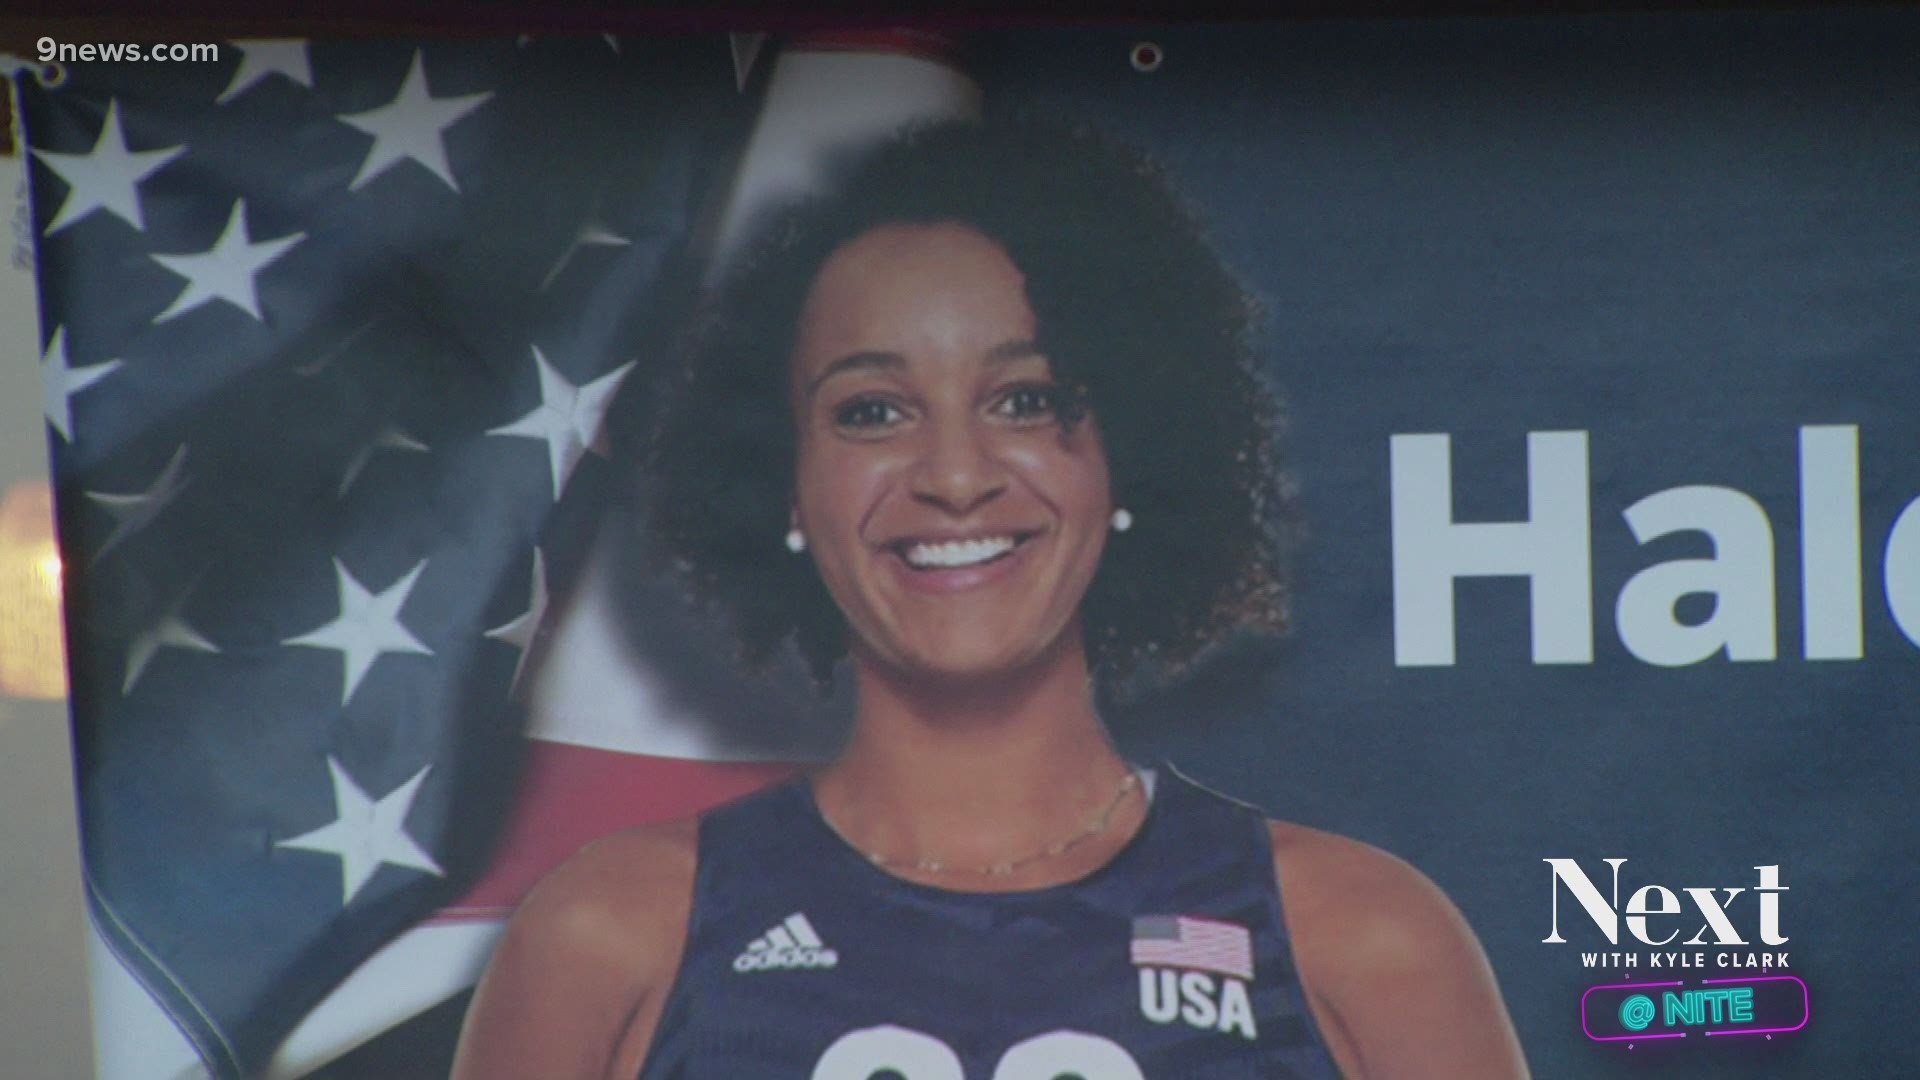 Idaho Springs, home to the old Gold Digger stadium, could soon be home to an Olympic gold medalist: volleyball player Haleigh Washington.